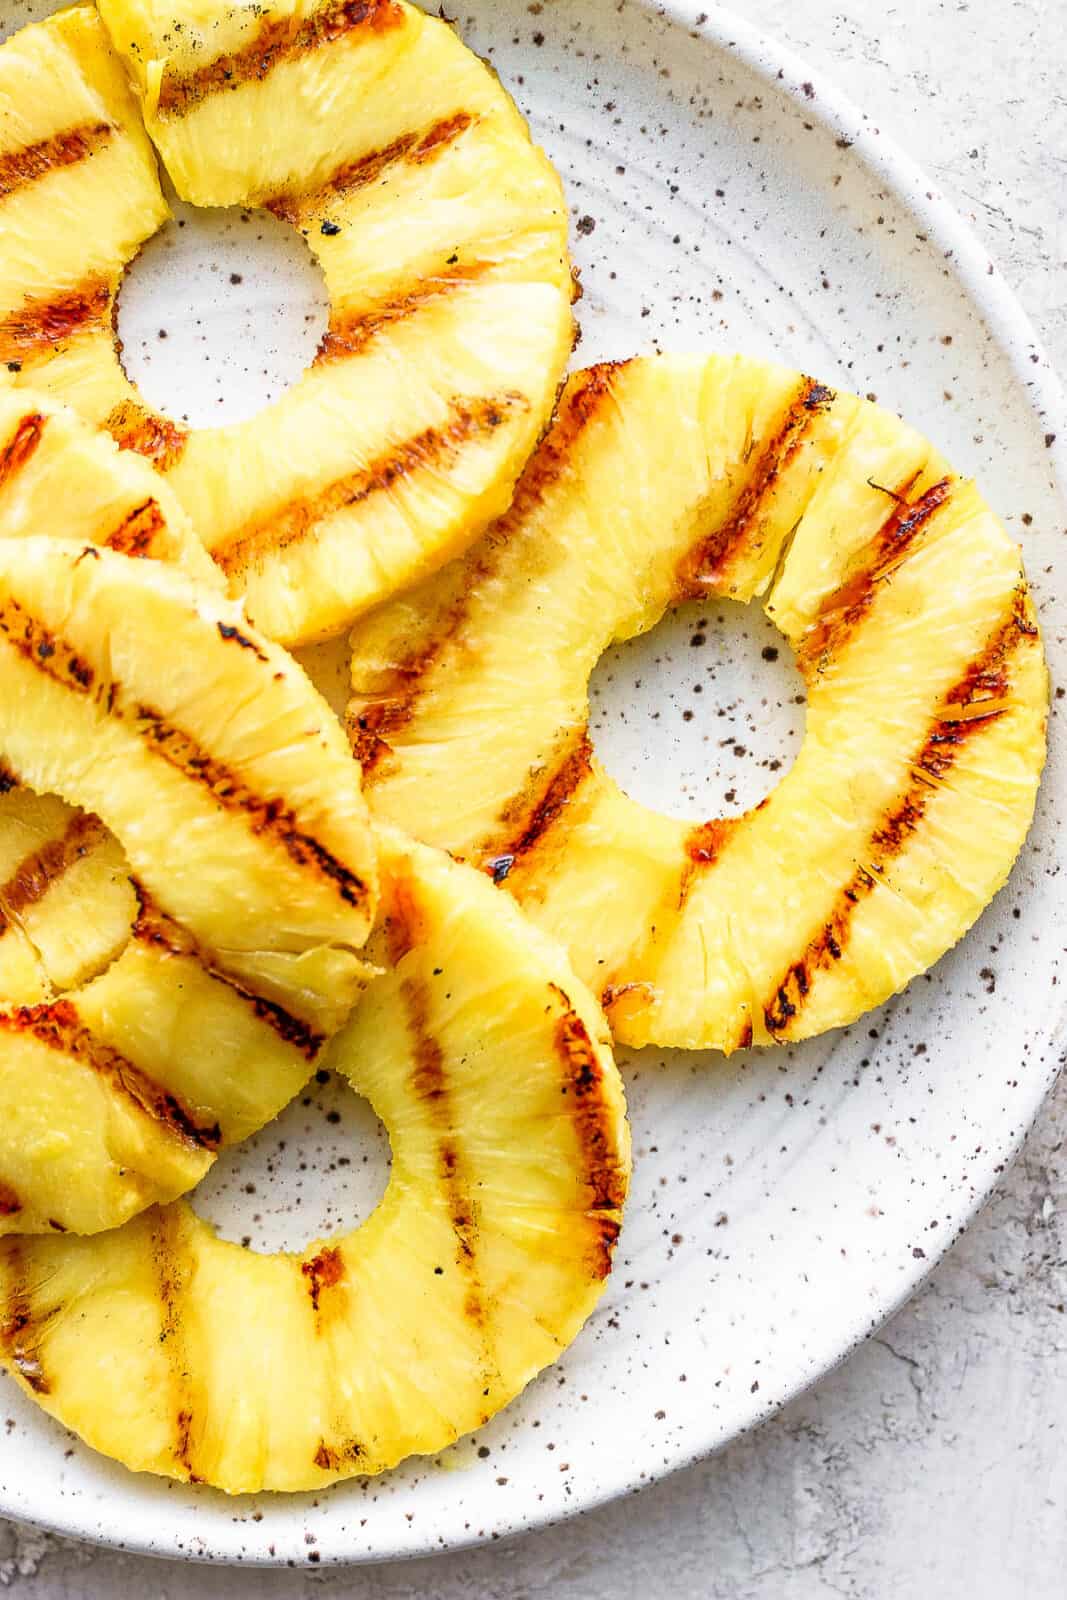 Grilled pineapple on a plate.